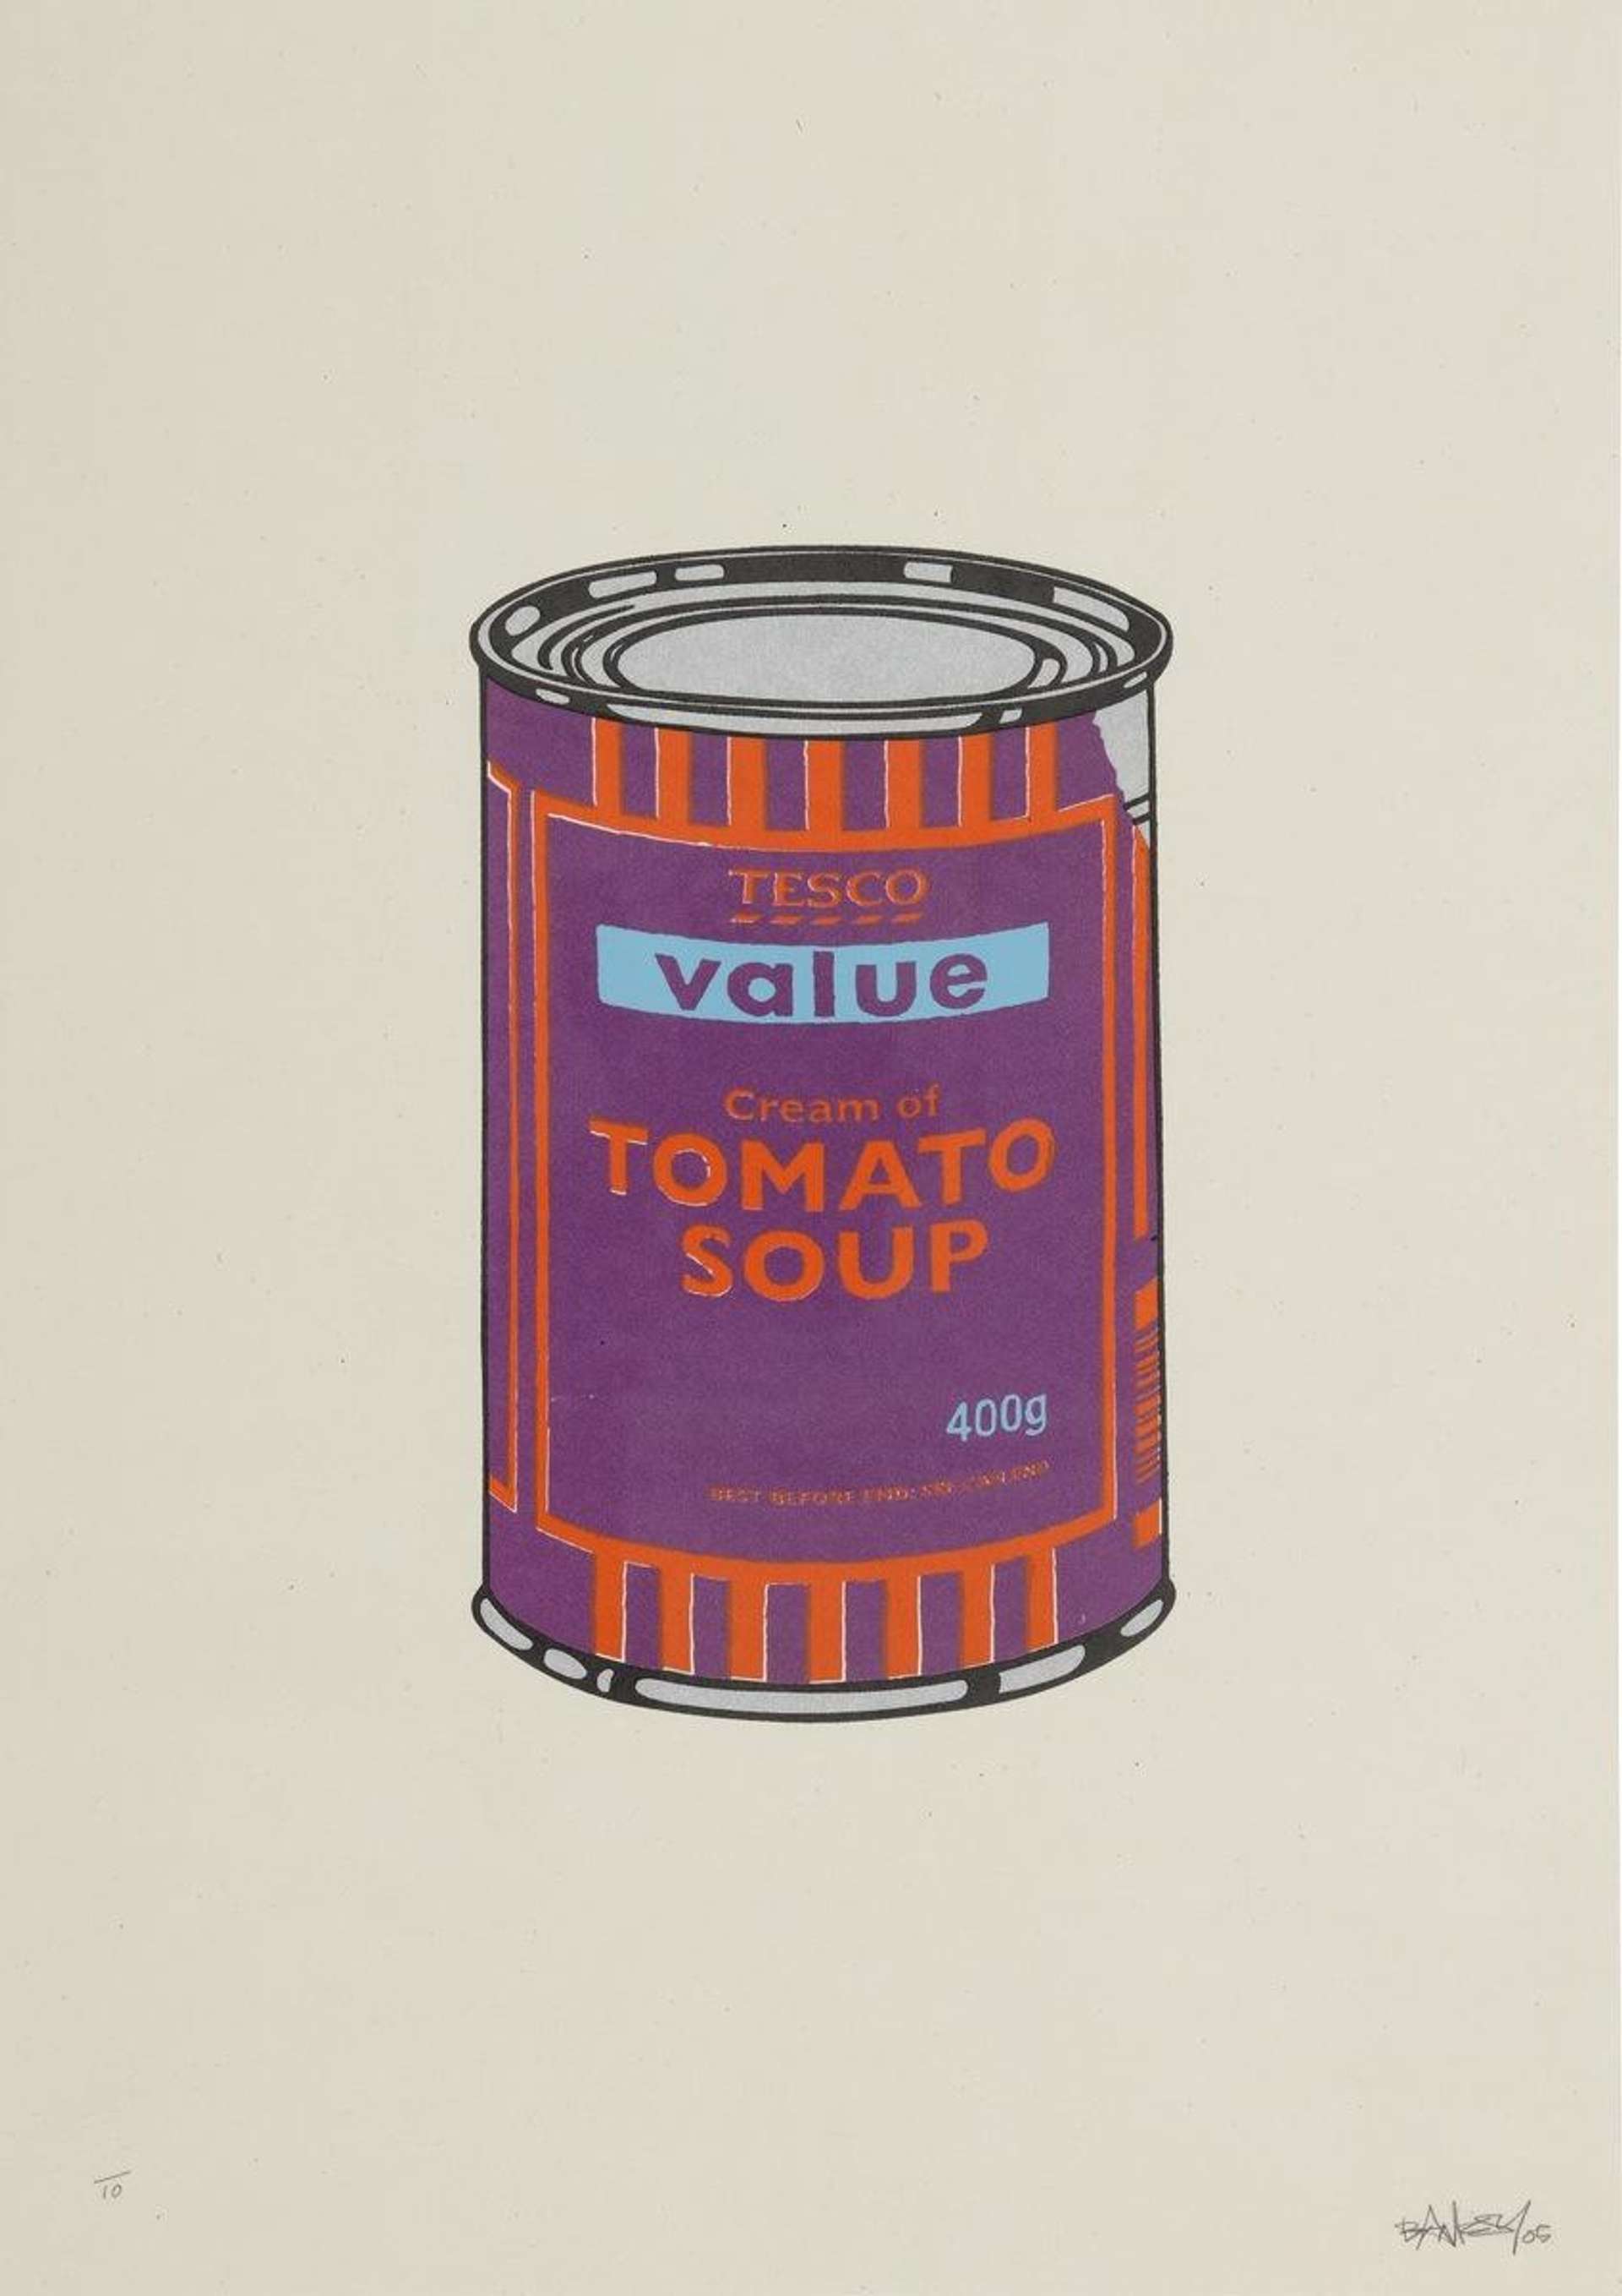 An image of a soup can by Banksy. It reads Tesco Value Cream of Tomato Soup, and is done in purple, orange and blue against a white background.